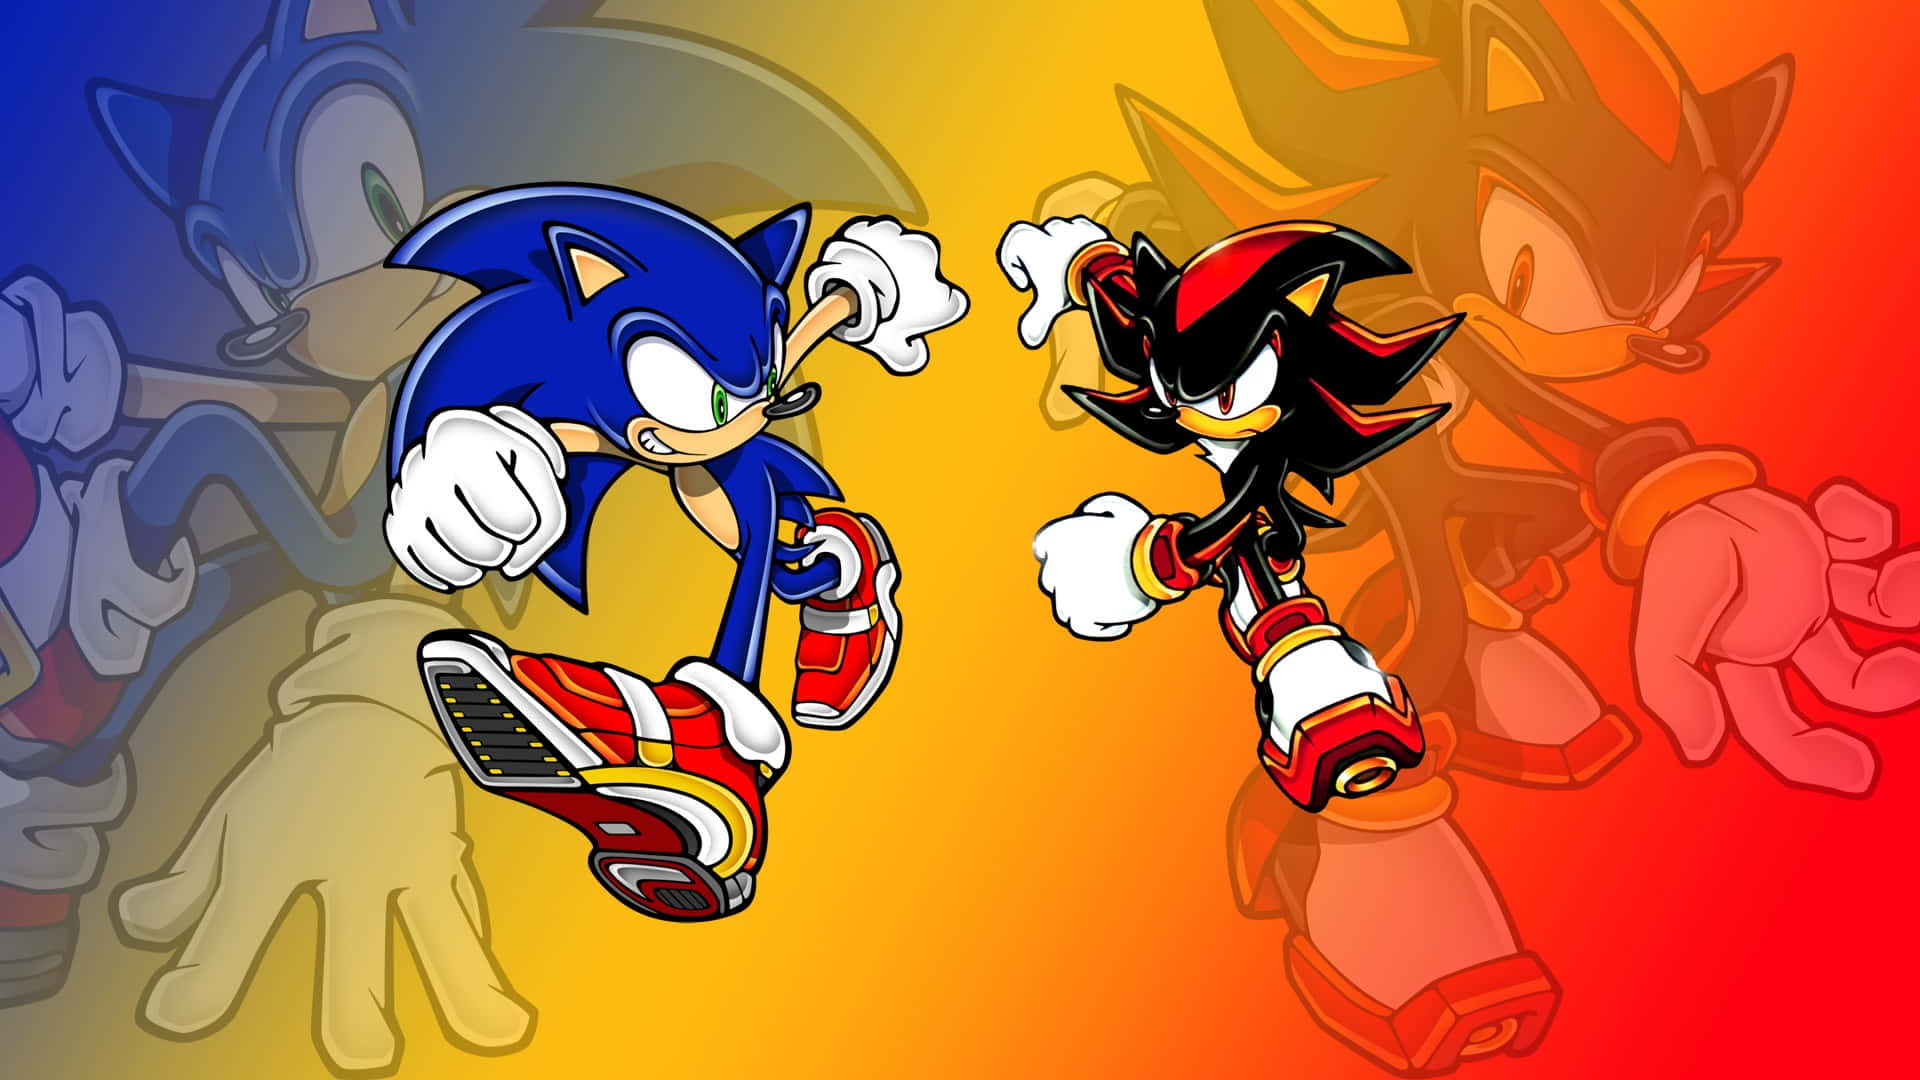 Caption: Sonic and Shadow Rivalry in Action Wallpaper